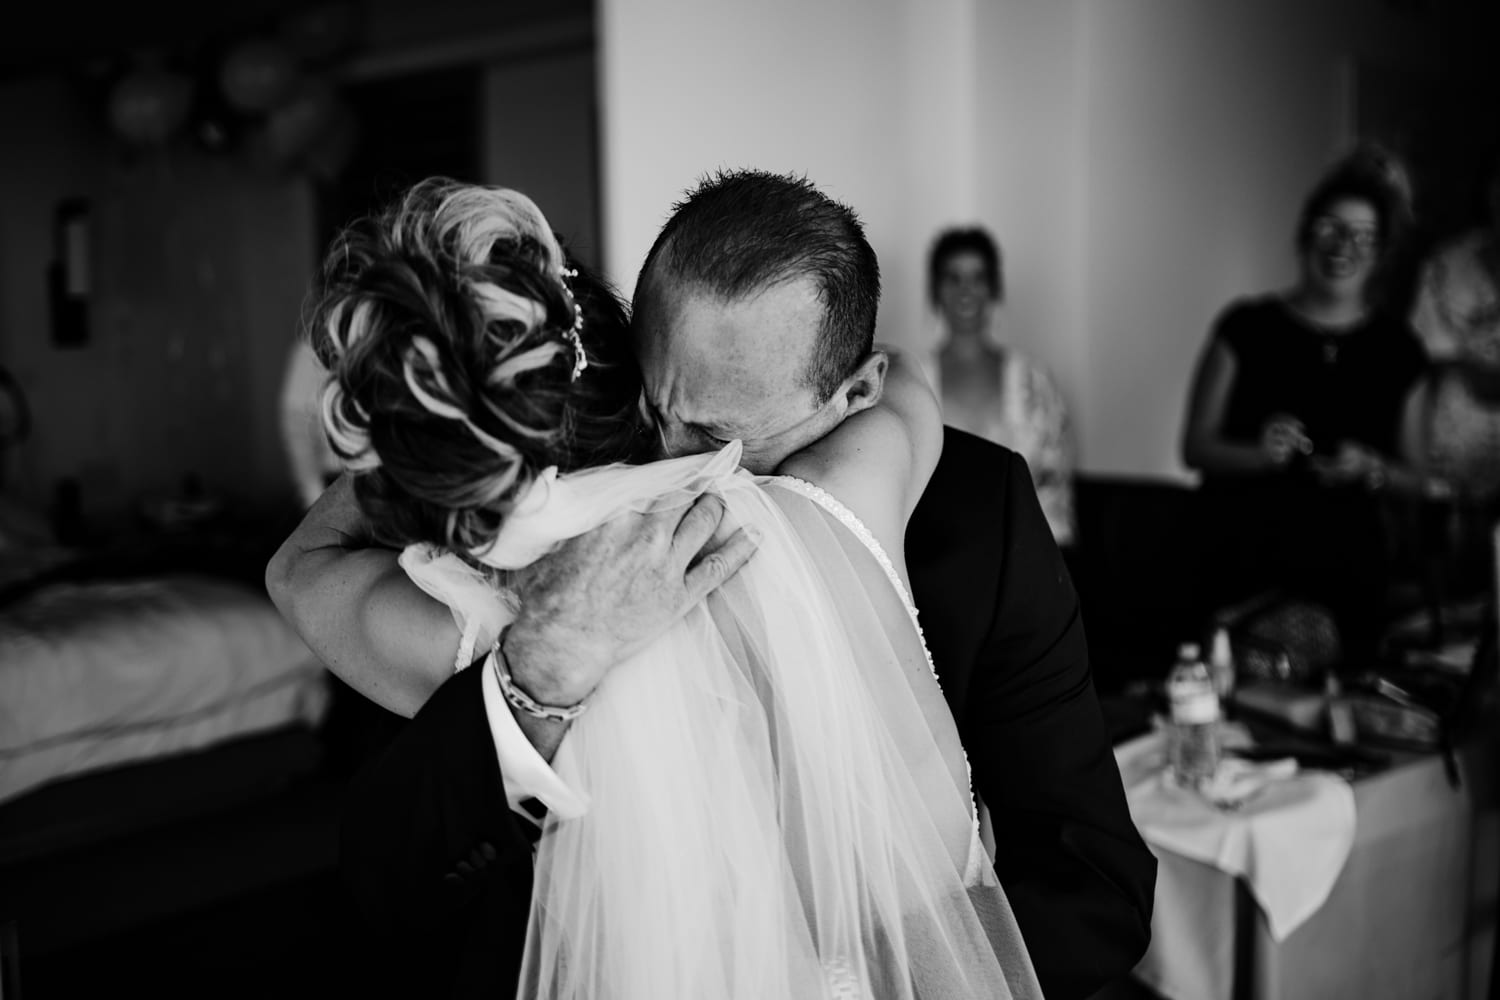 A bride is hugging her father during a wedding at Eden Roc Resort Miami.